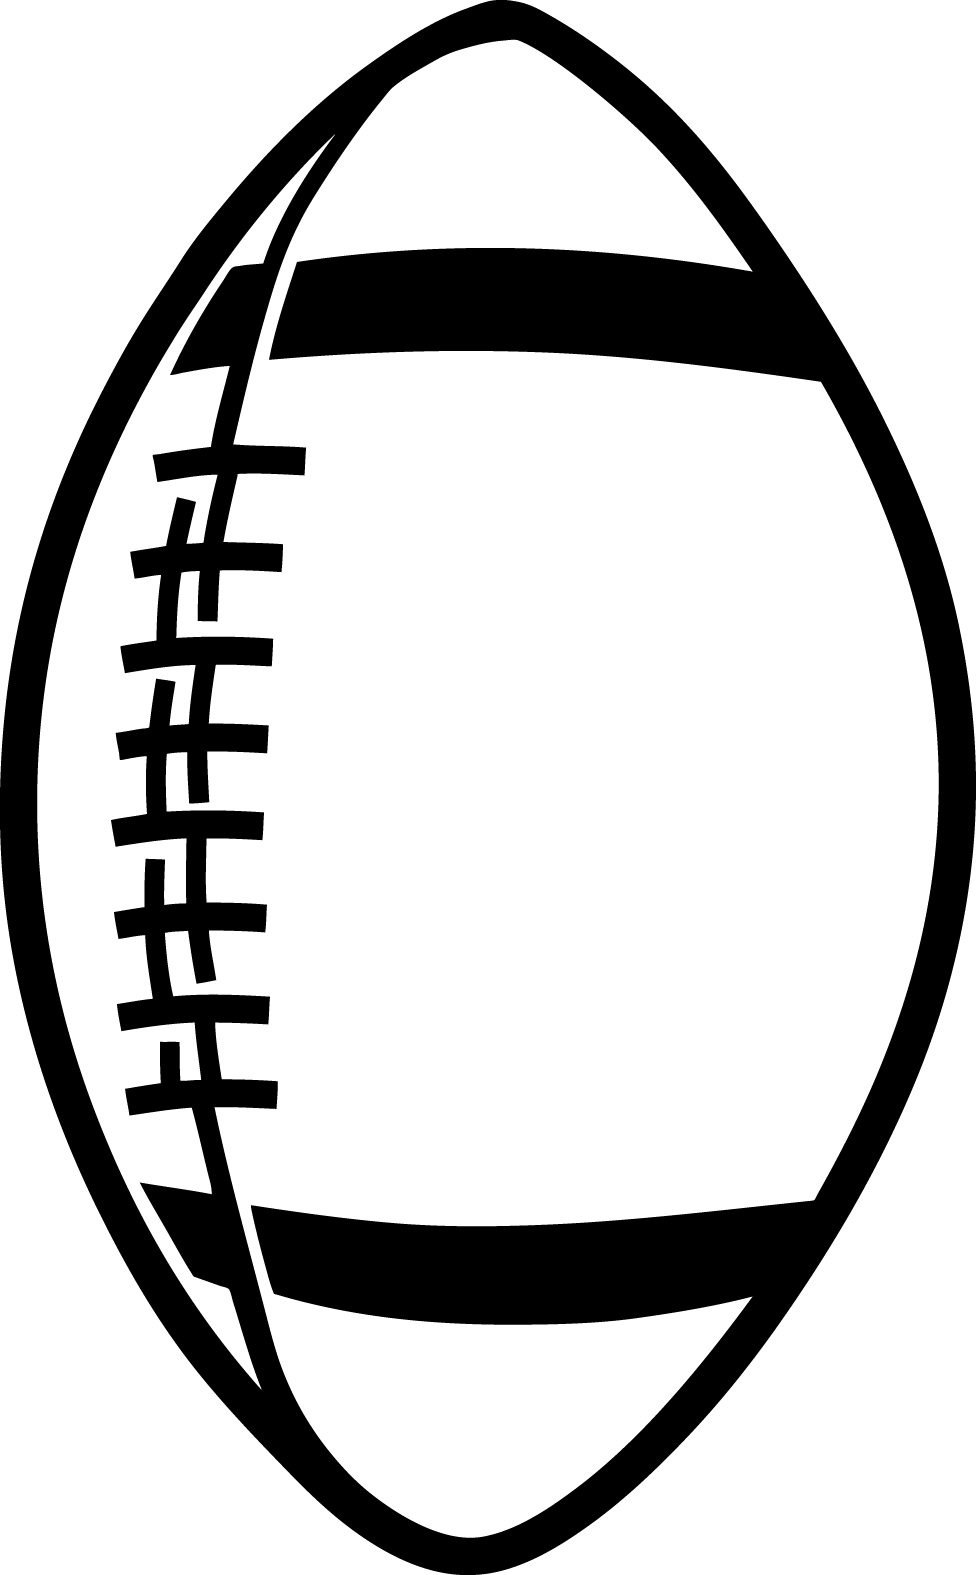 Football outline outline of a